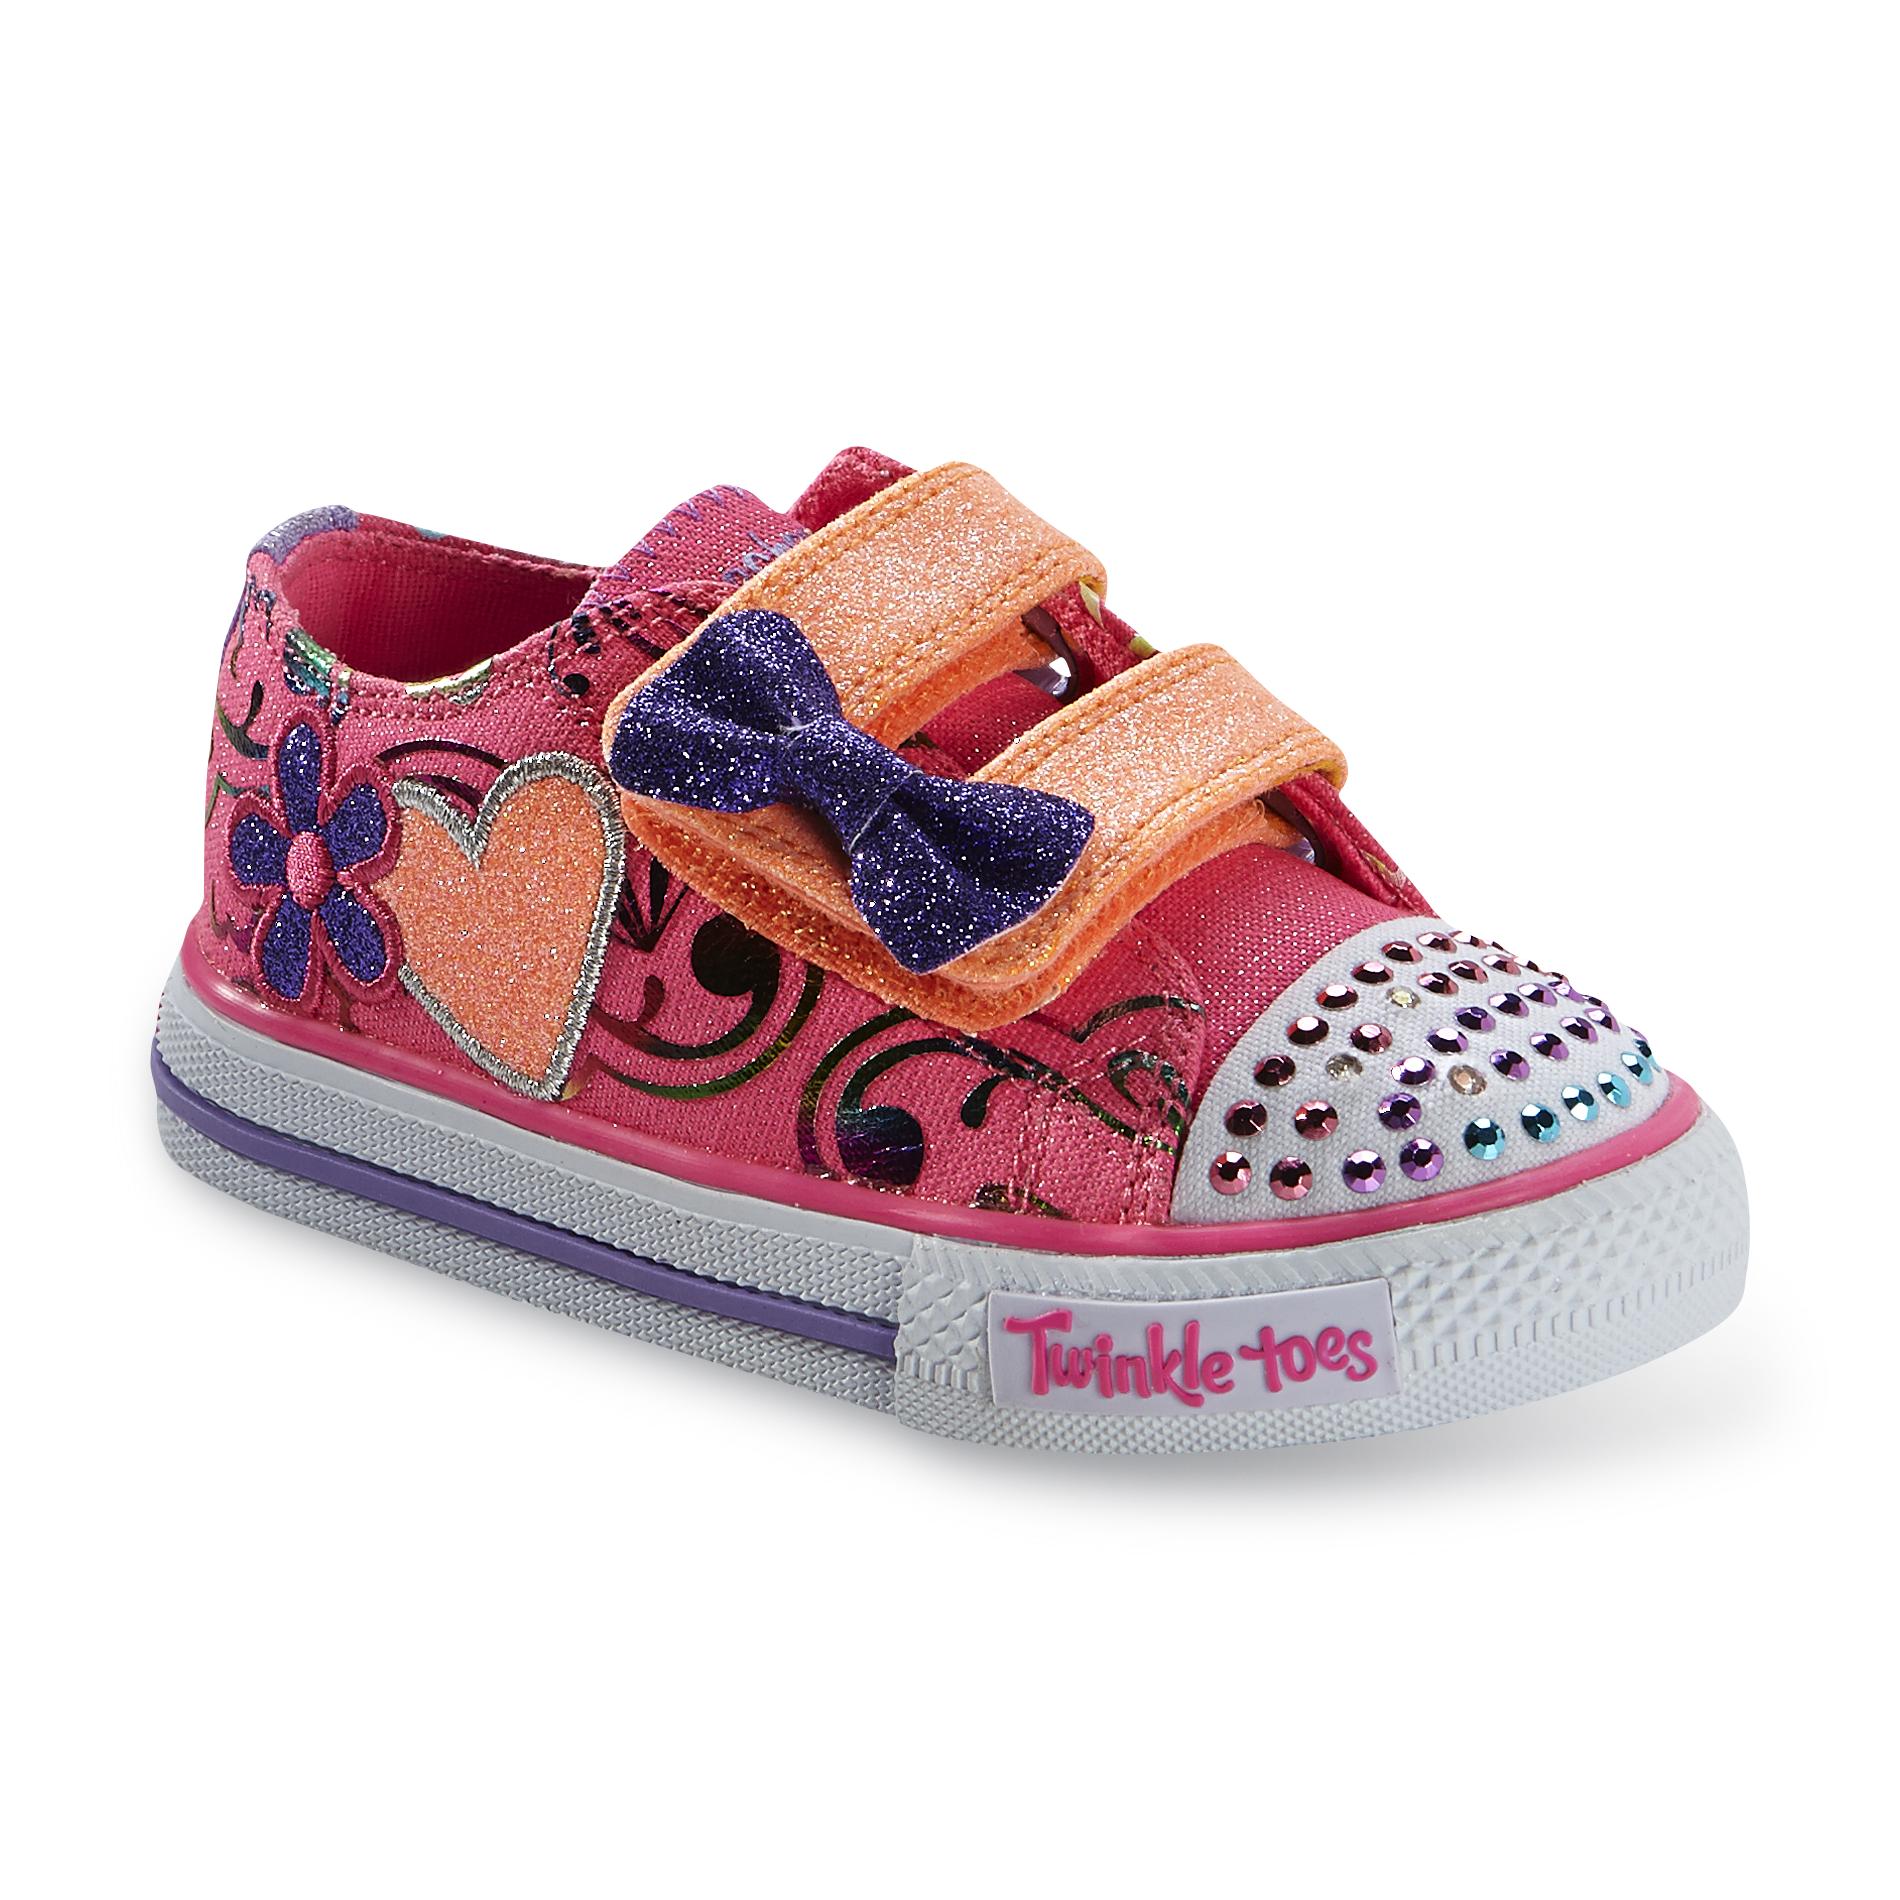 Skechers Toddler Girl's Twinkle Toes Double Adore Pink/Multicolor Athletic Shoe